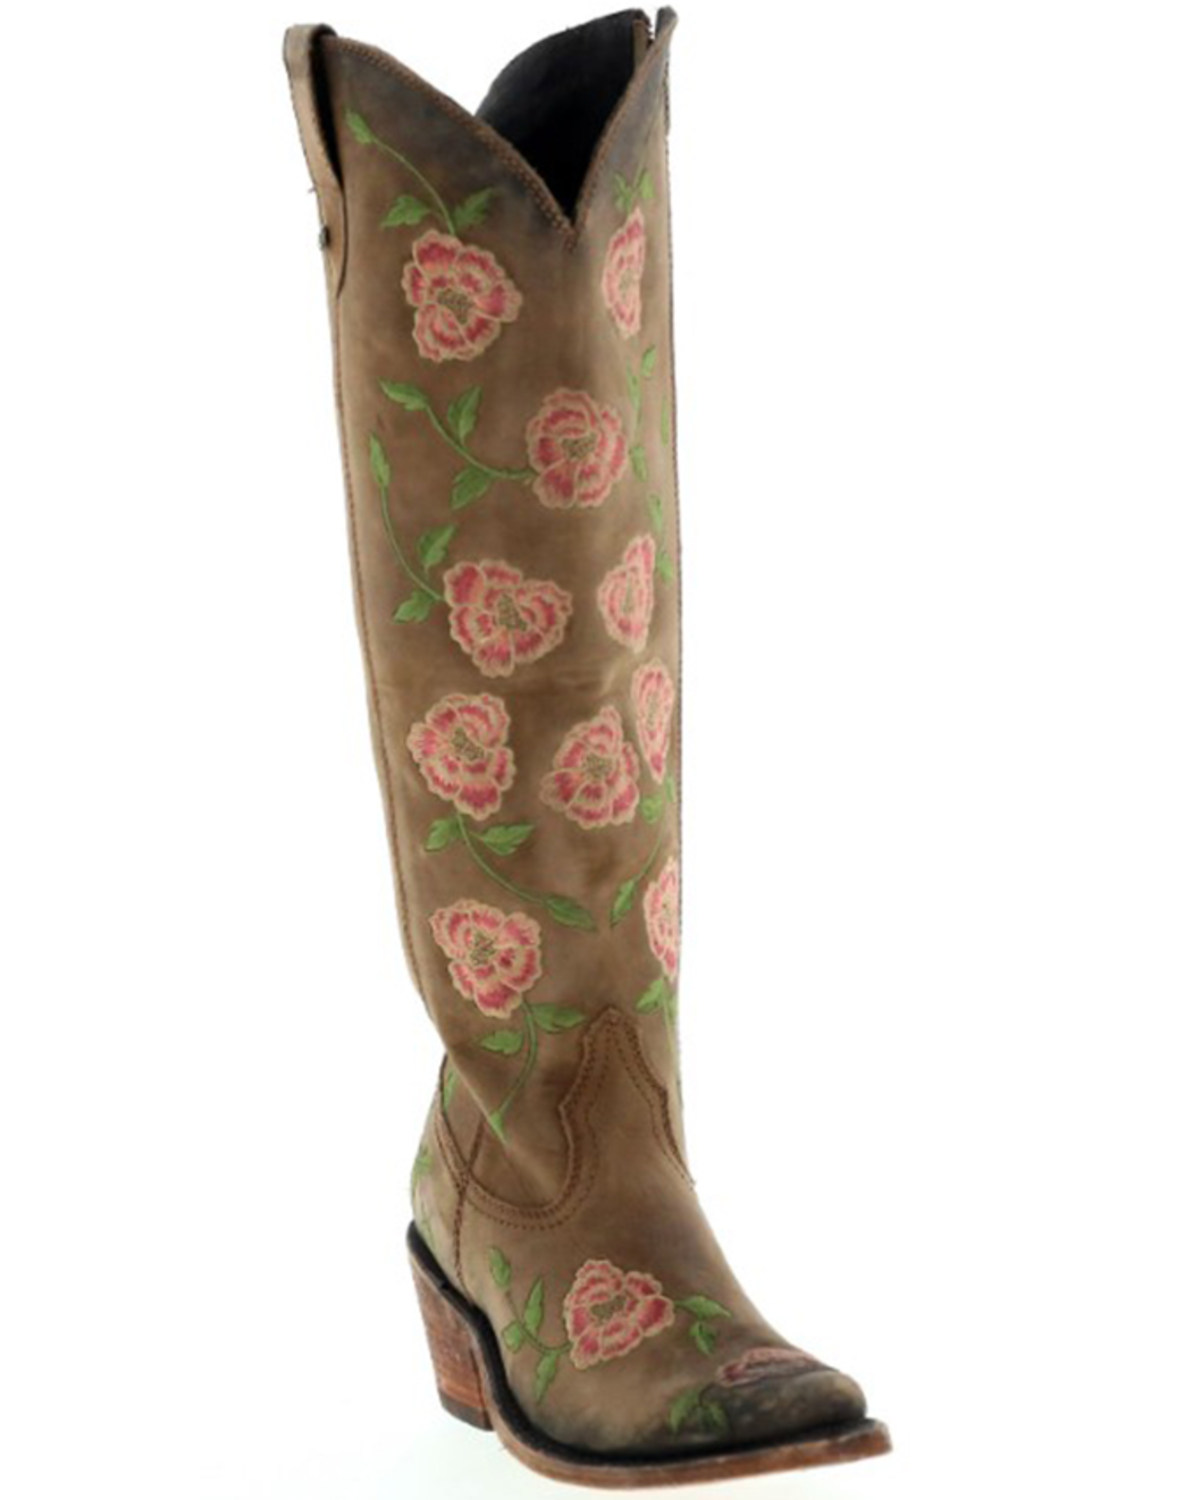 Botas Caborca for Liberty Black Women's Garden Embroidered Floral Western Tall Boots - Snip Toe